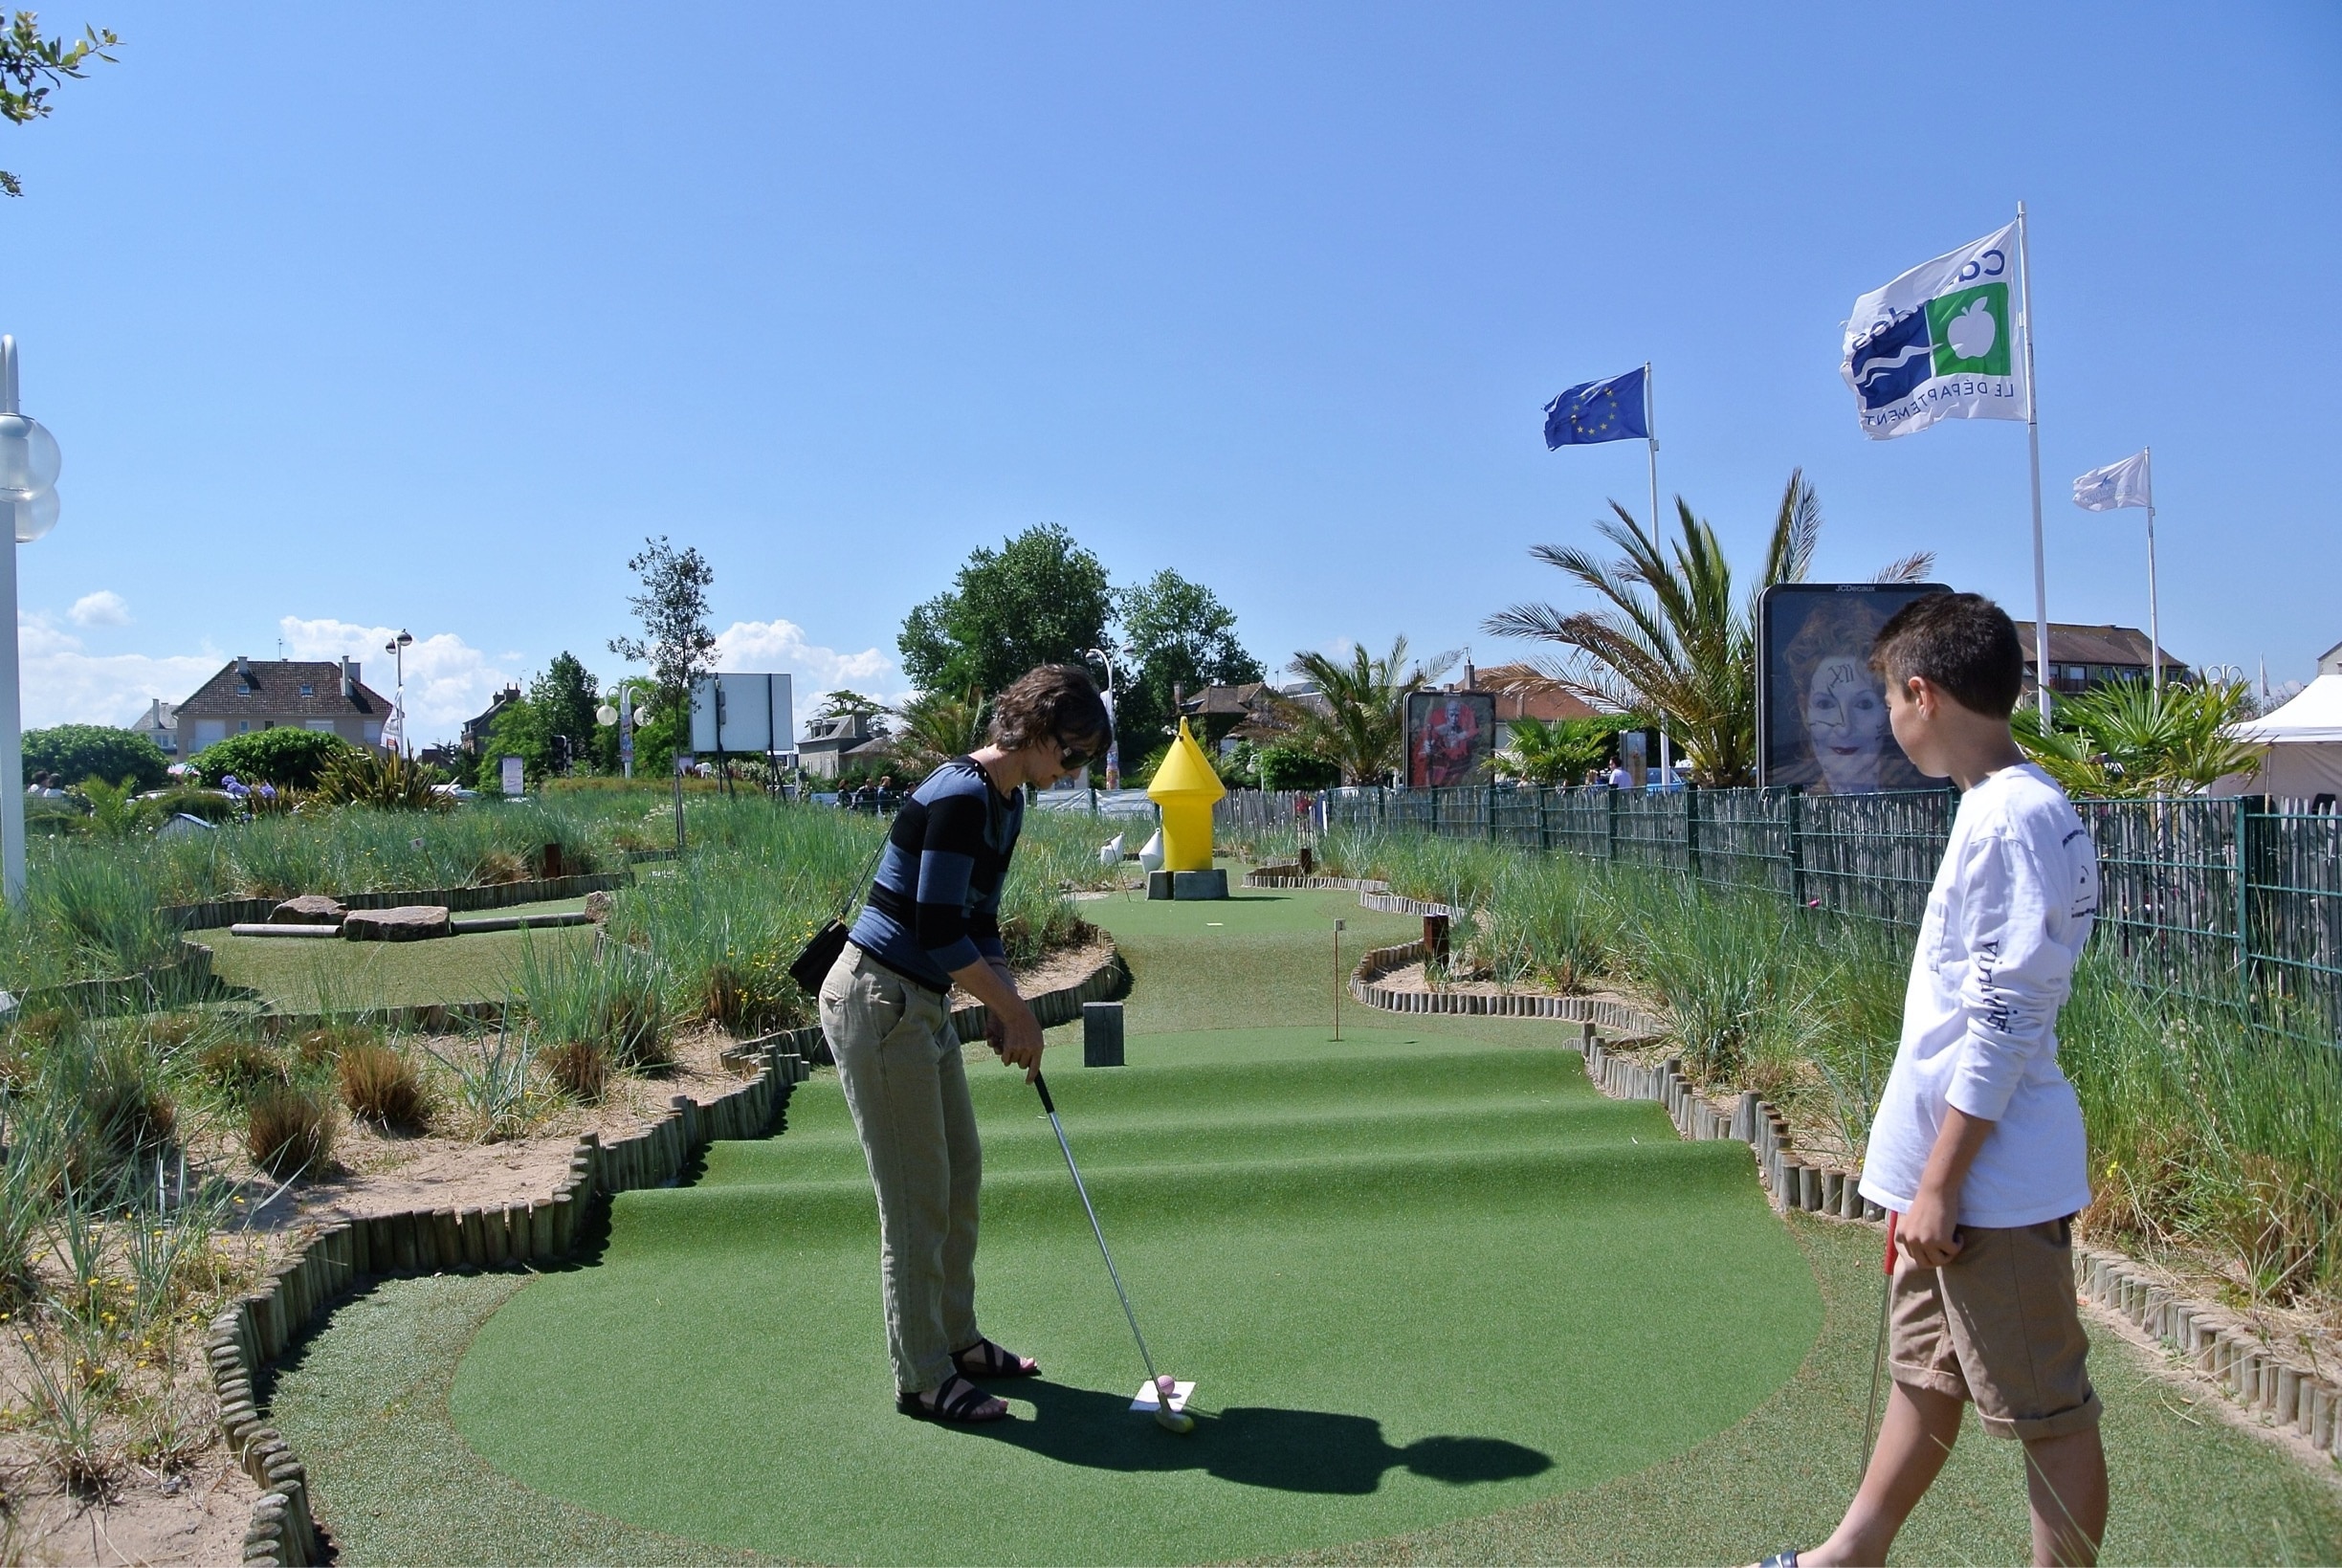 Best mini golf in Normandy.👨‍👨‍👧 
Town of Ouistreham was an unexpected surprise next to beach. 